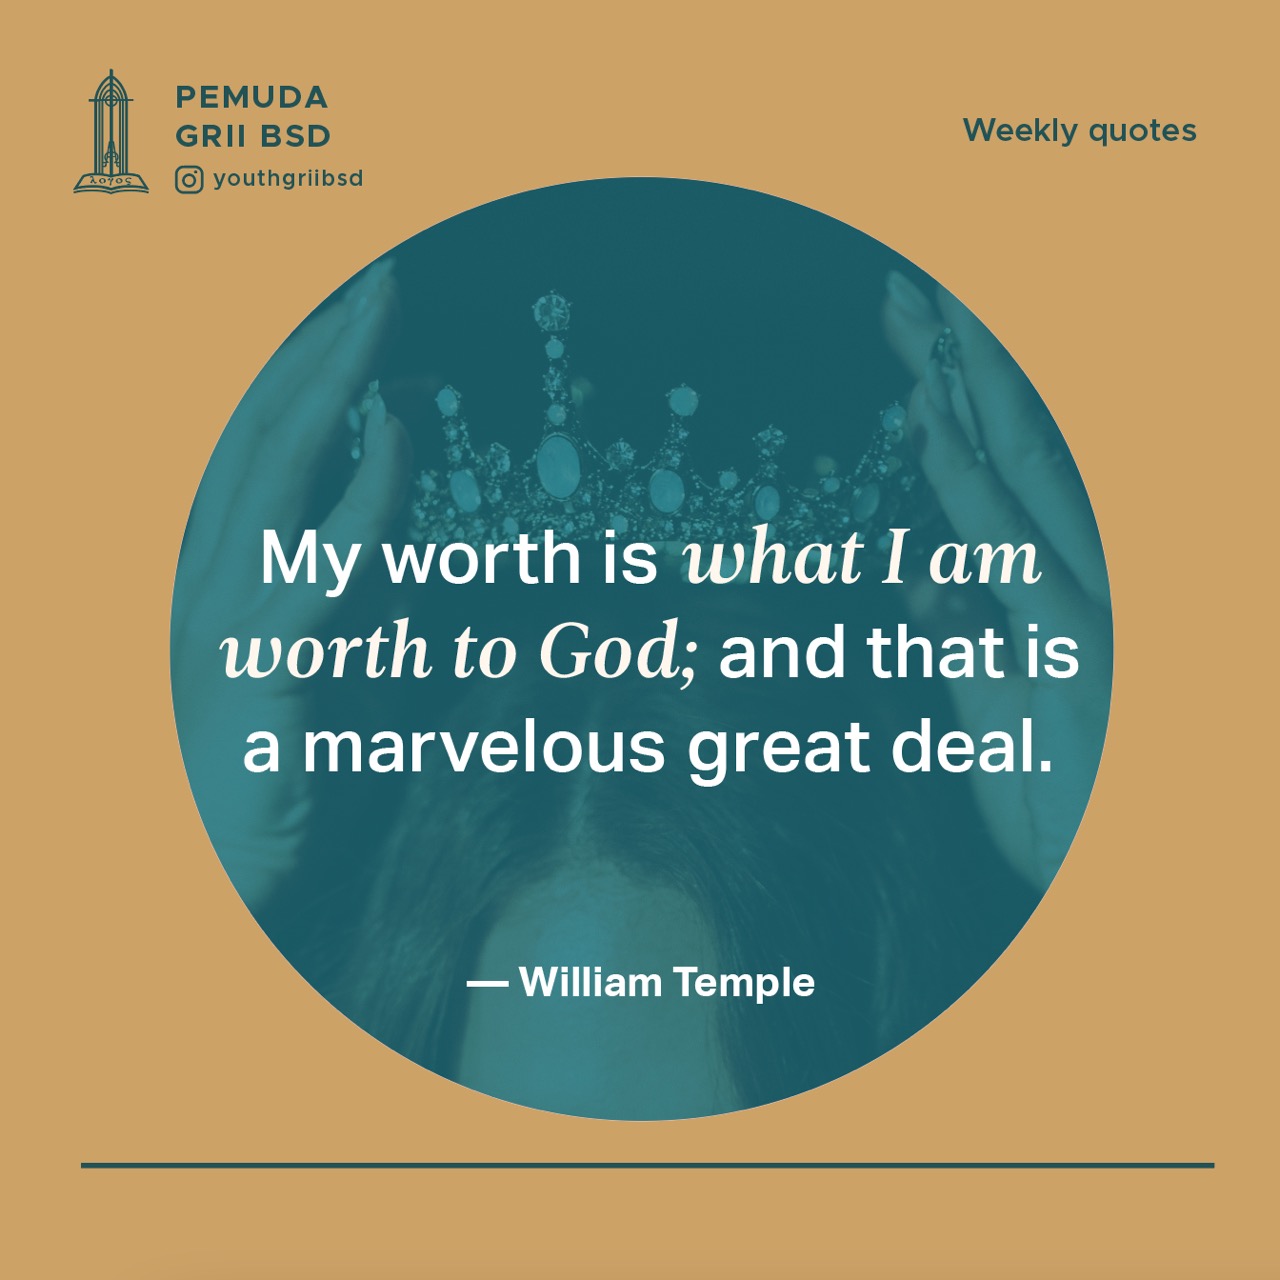 My worth is what I am worth to God; and that is a marvelous great deal.